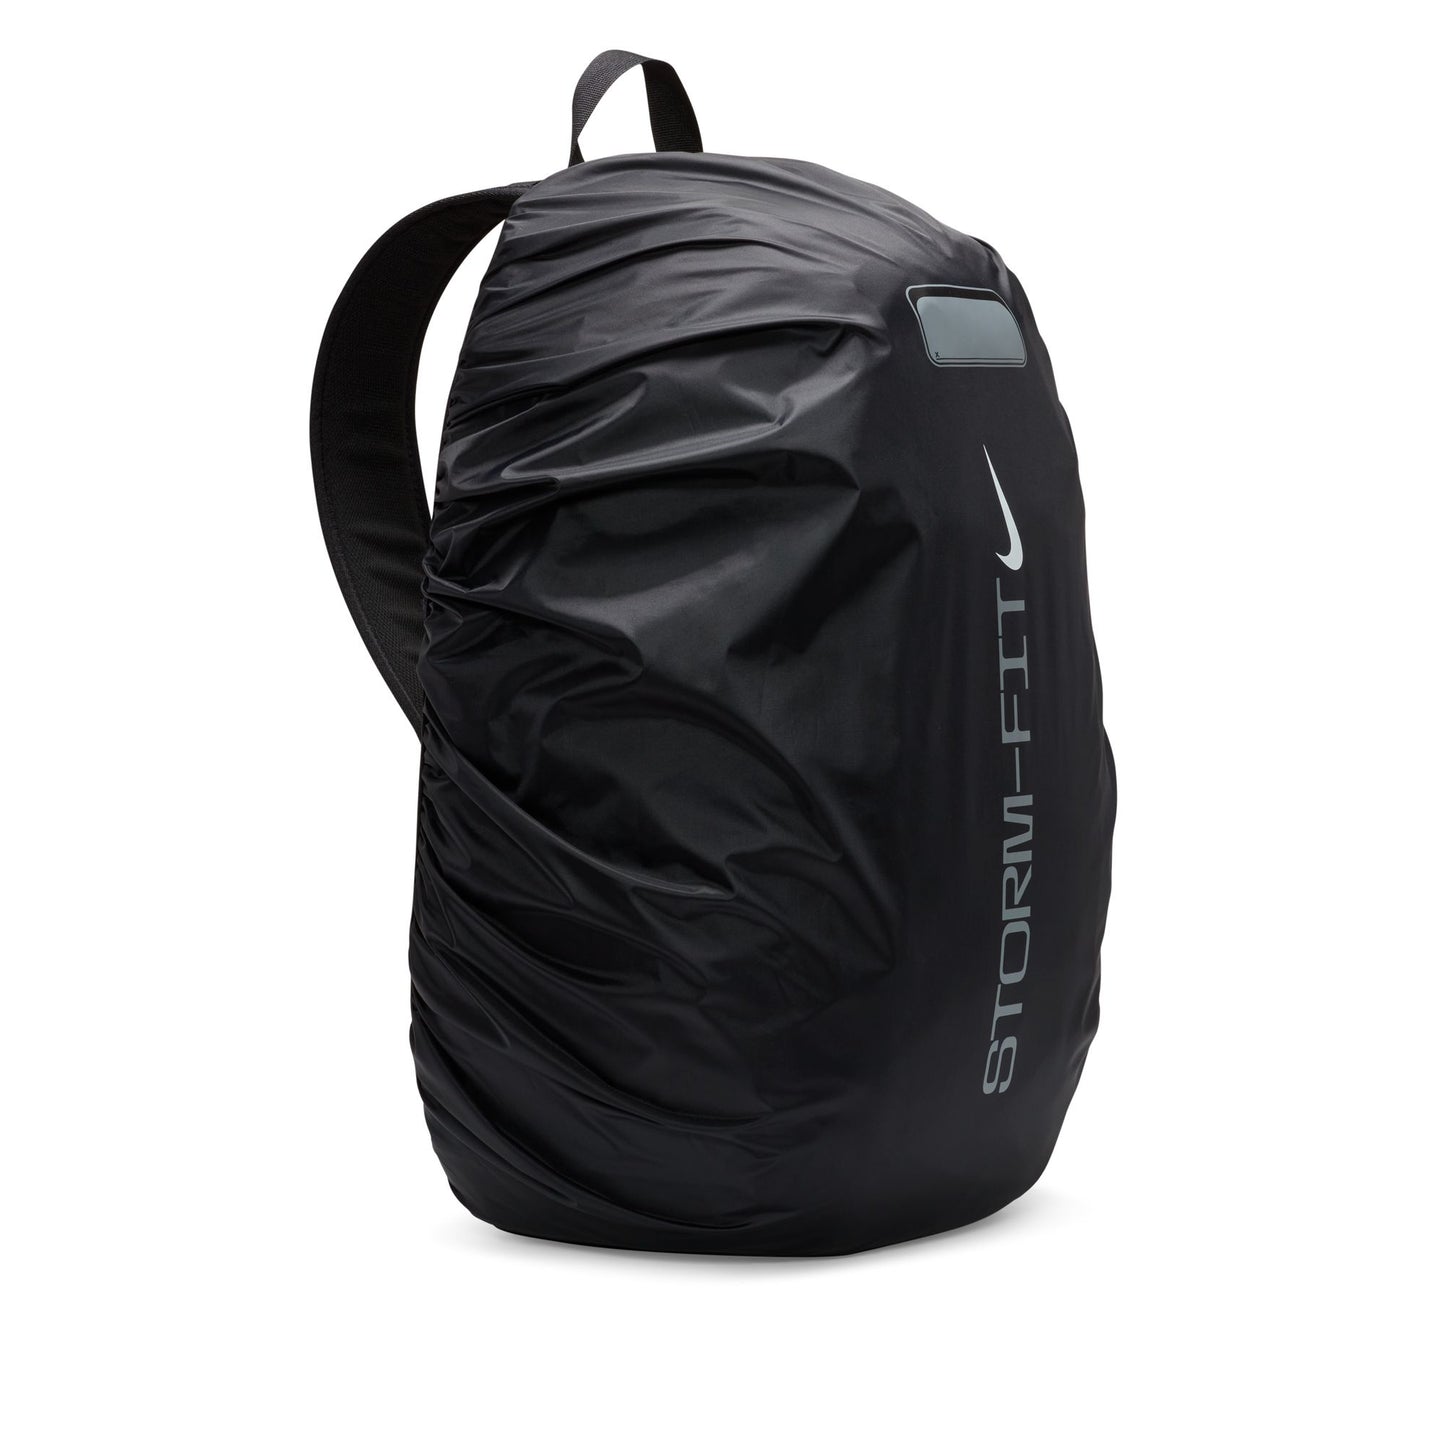 THE PRO PROJECT TEAM BACKPACK